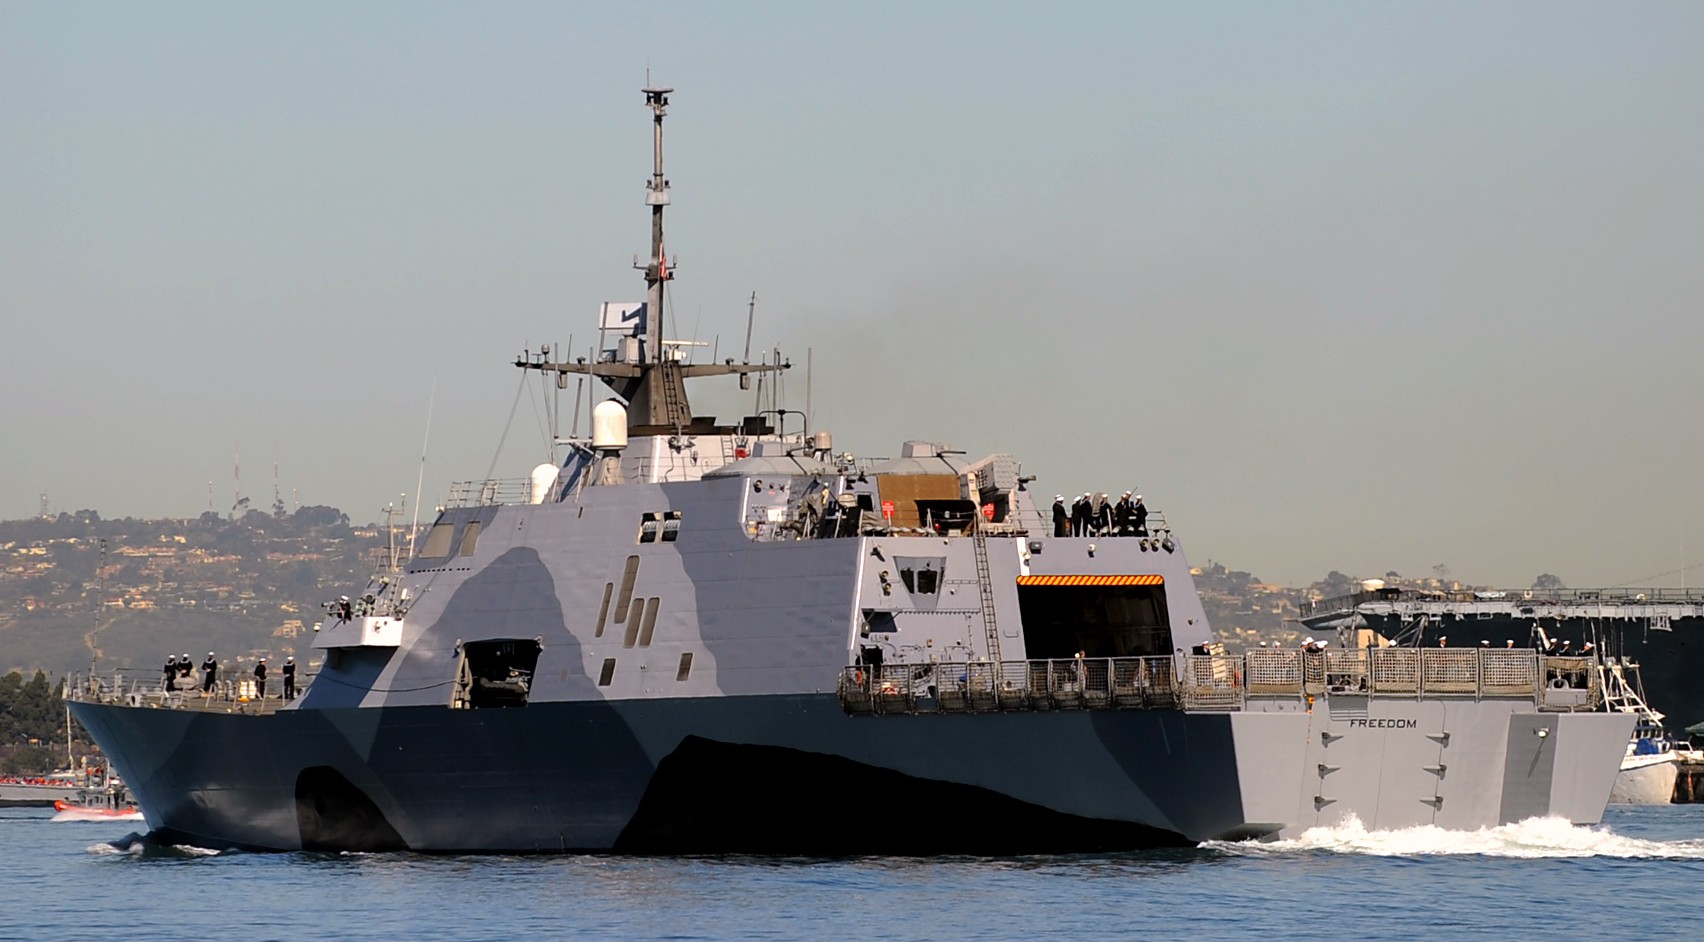 lcs-1 uss freedom class littoral combat ship us navy 45